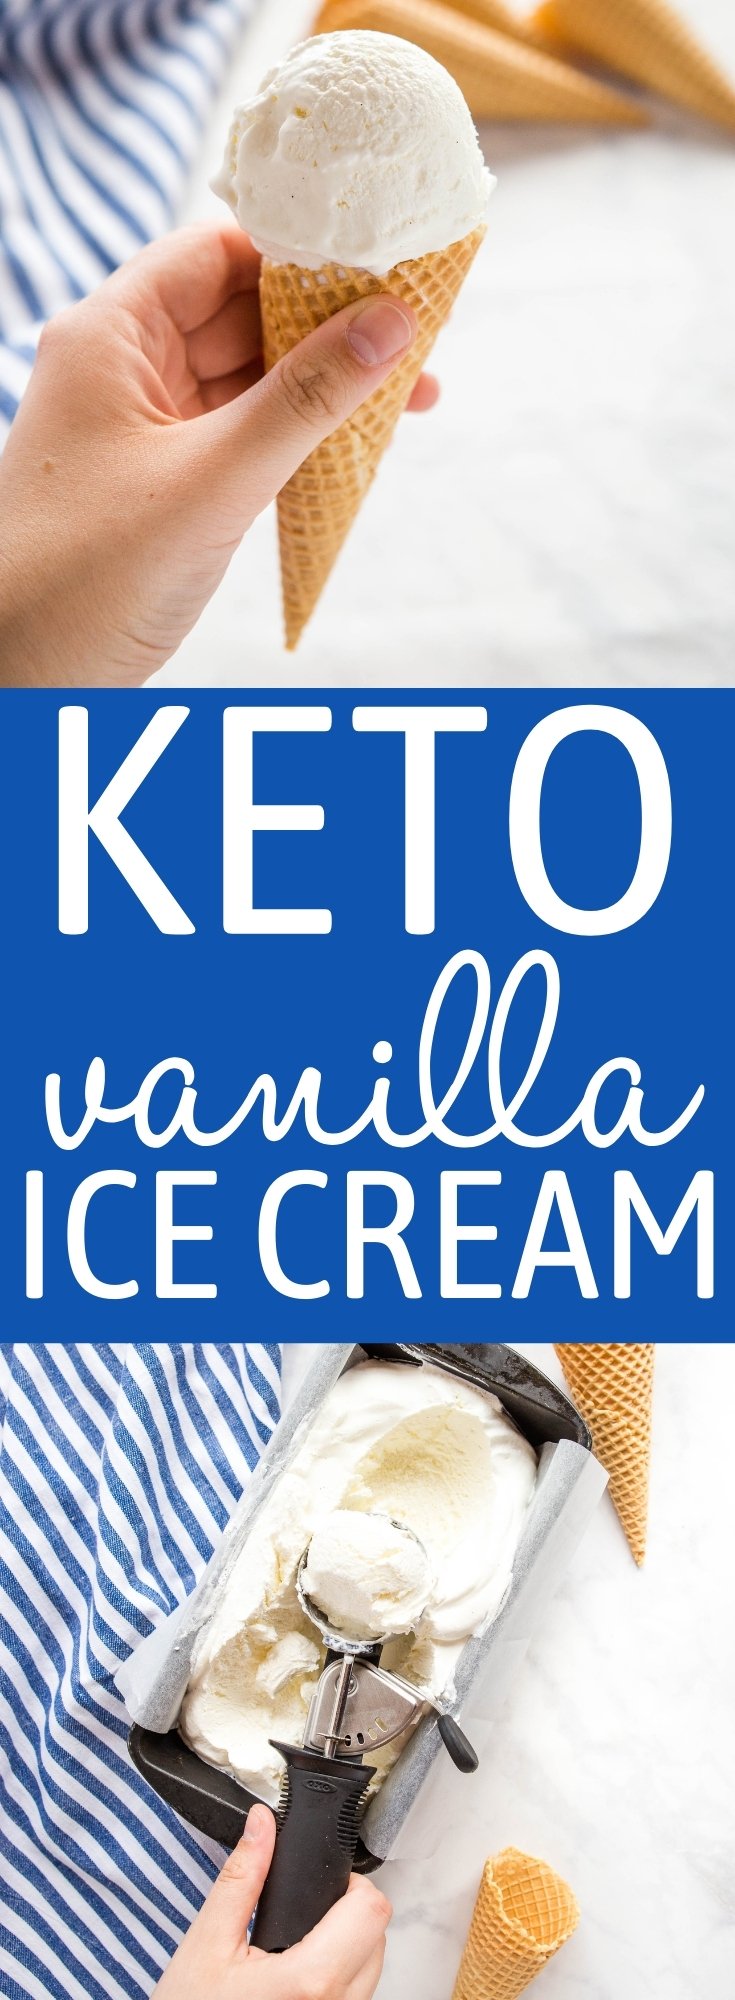 This Keto Ice Cream is flavoured with vanilla and it's the perfect homemade ice cream that's low in carbs, creamy, smooth and delicious! Recipe from thebusybaker.ca! #ketoicecream #keto #lowcarbicecream #healthy #nosugar #healthydessert via @busybakerblog